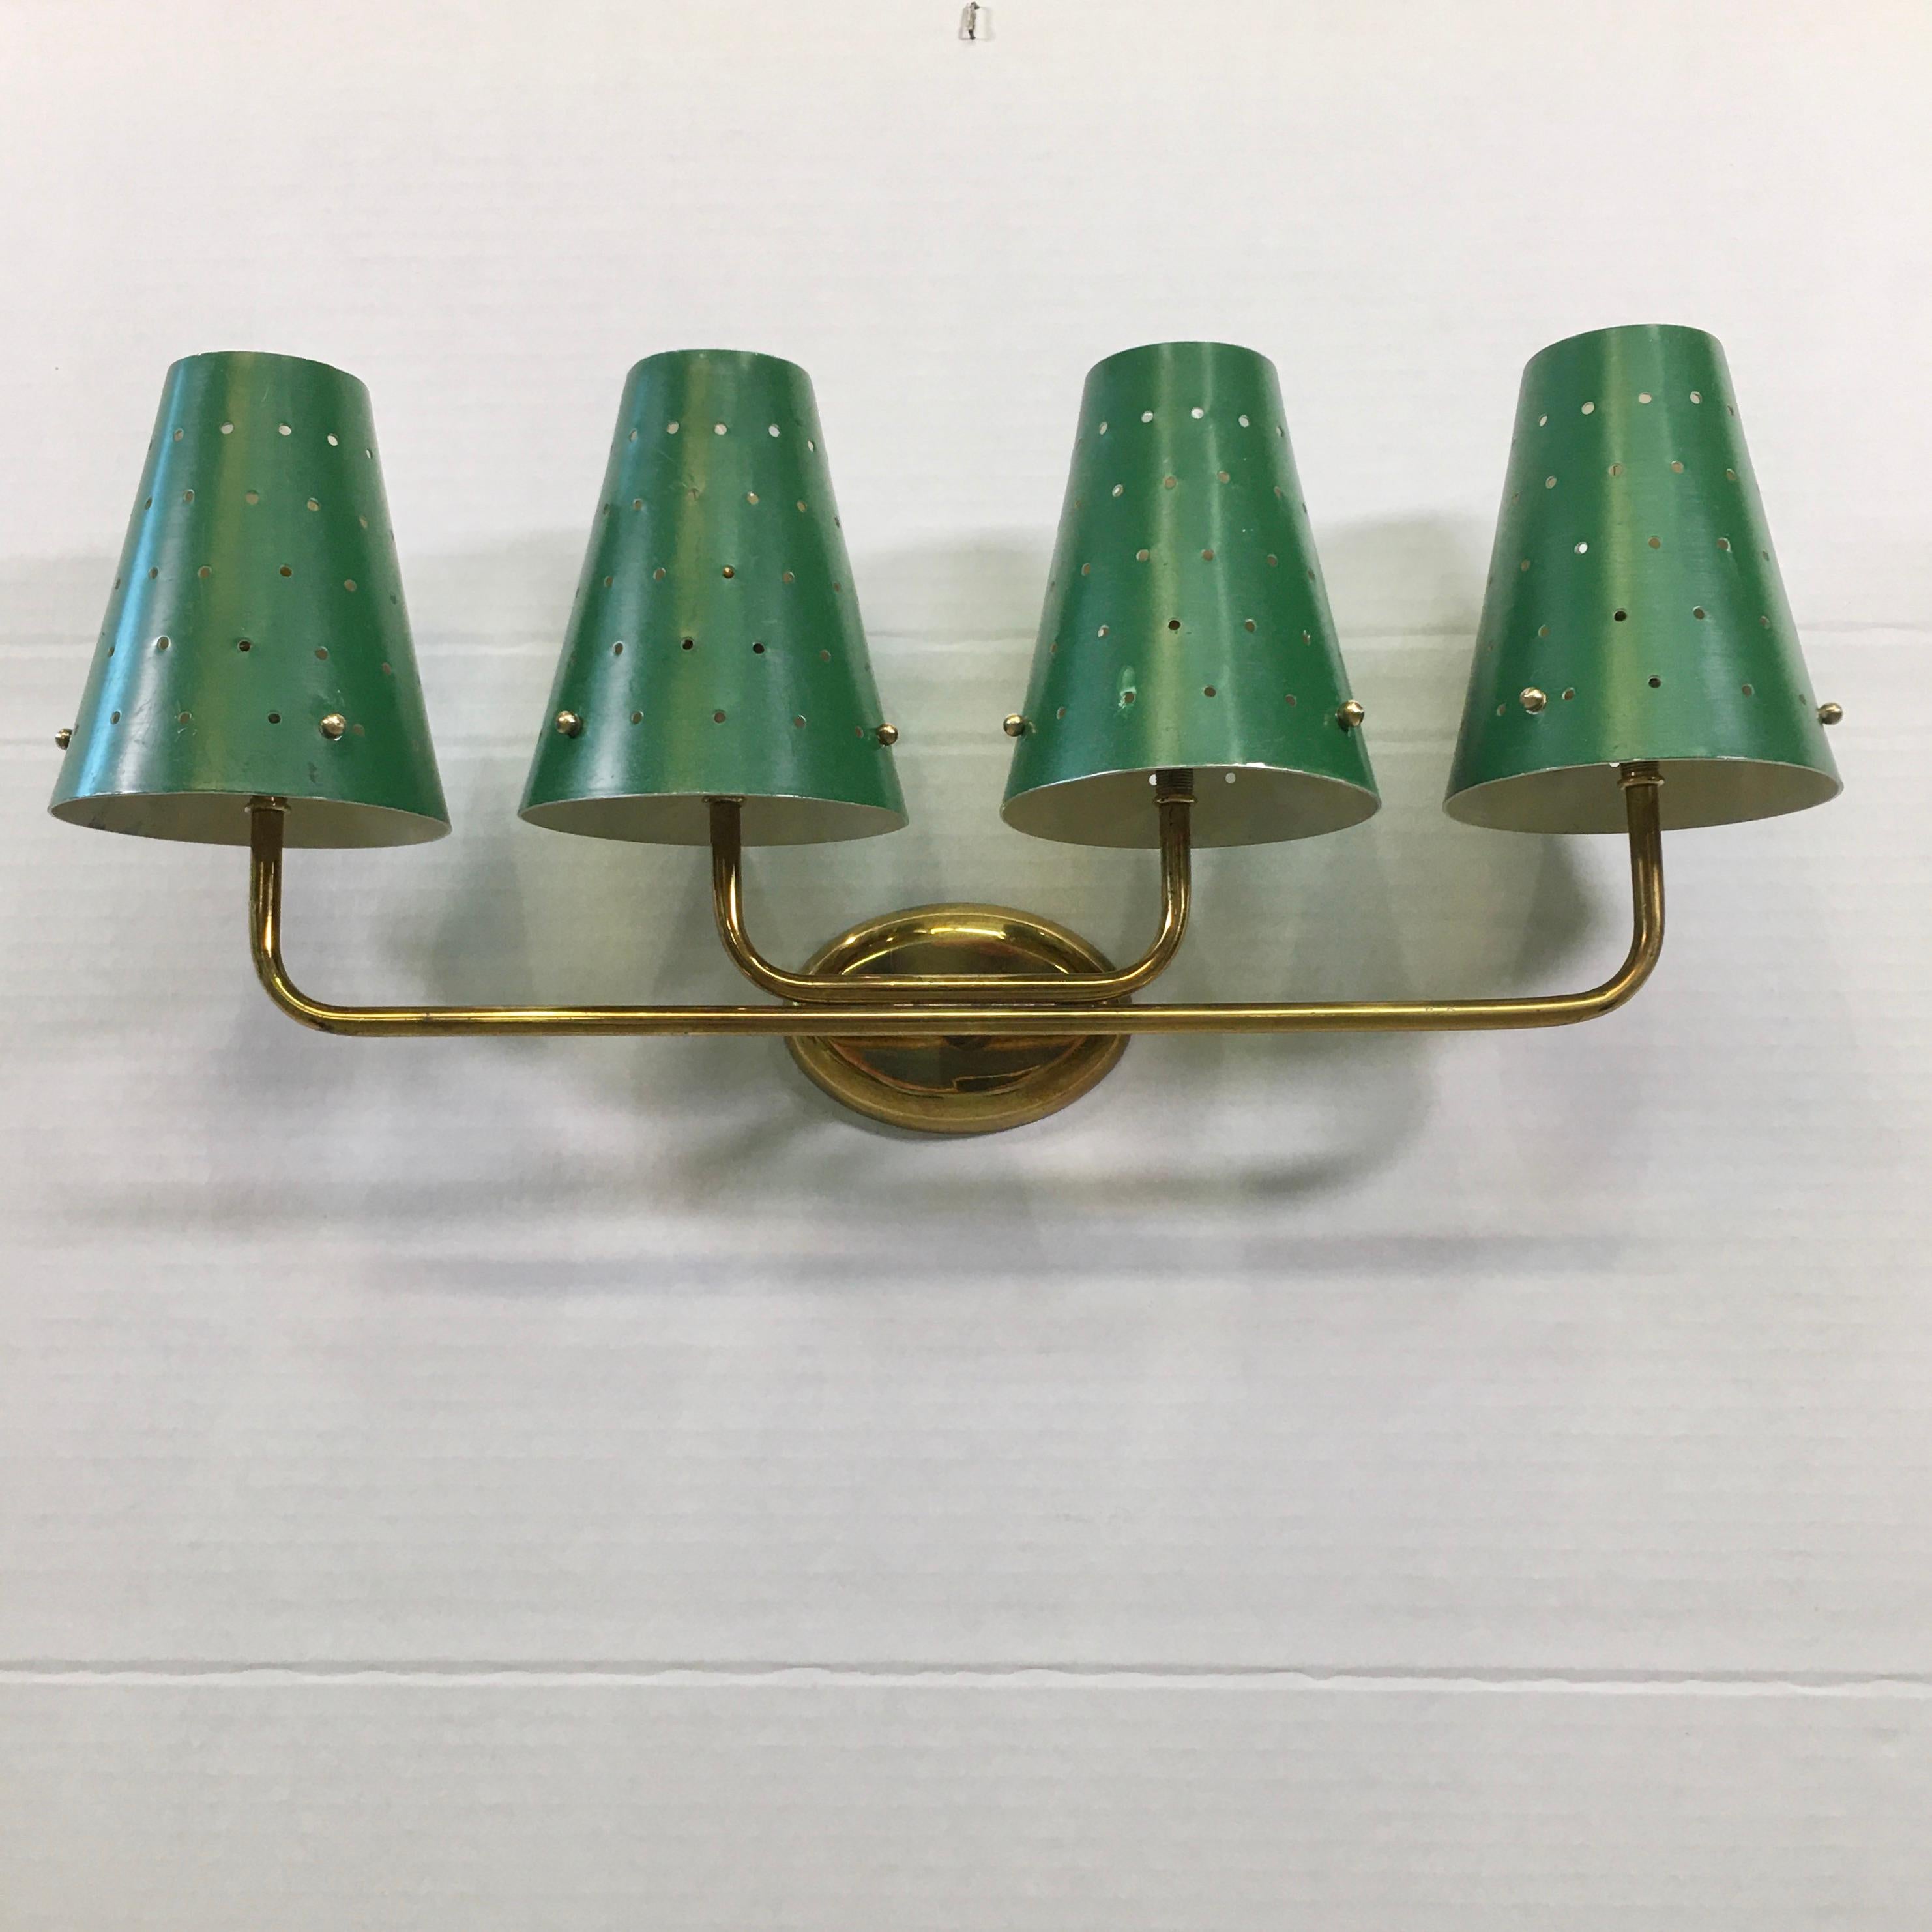 Enameled French Four-Arm Brass Sconce with Perforated Metal Shades